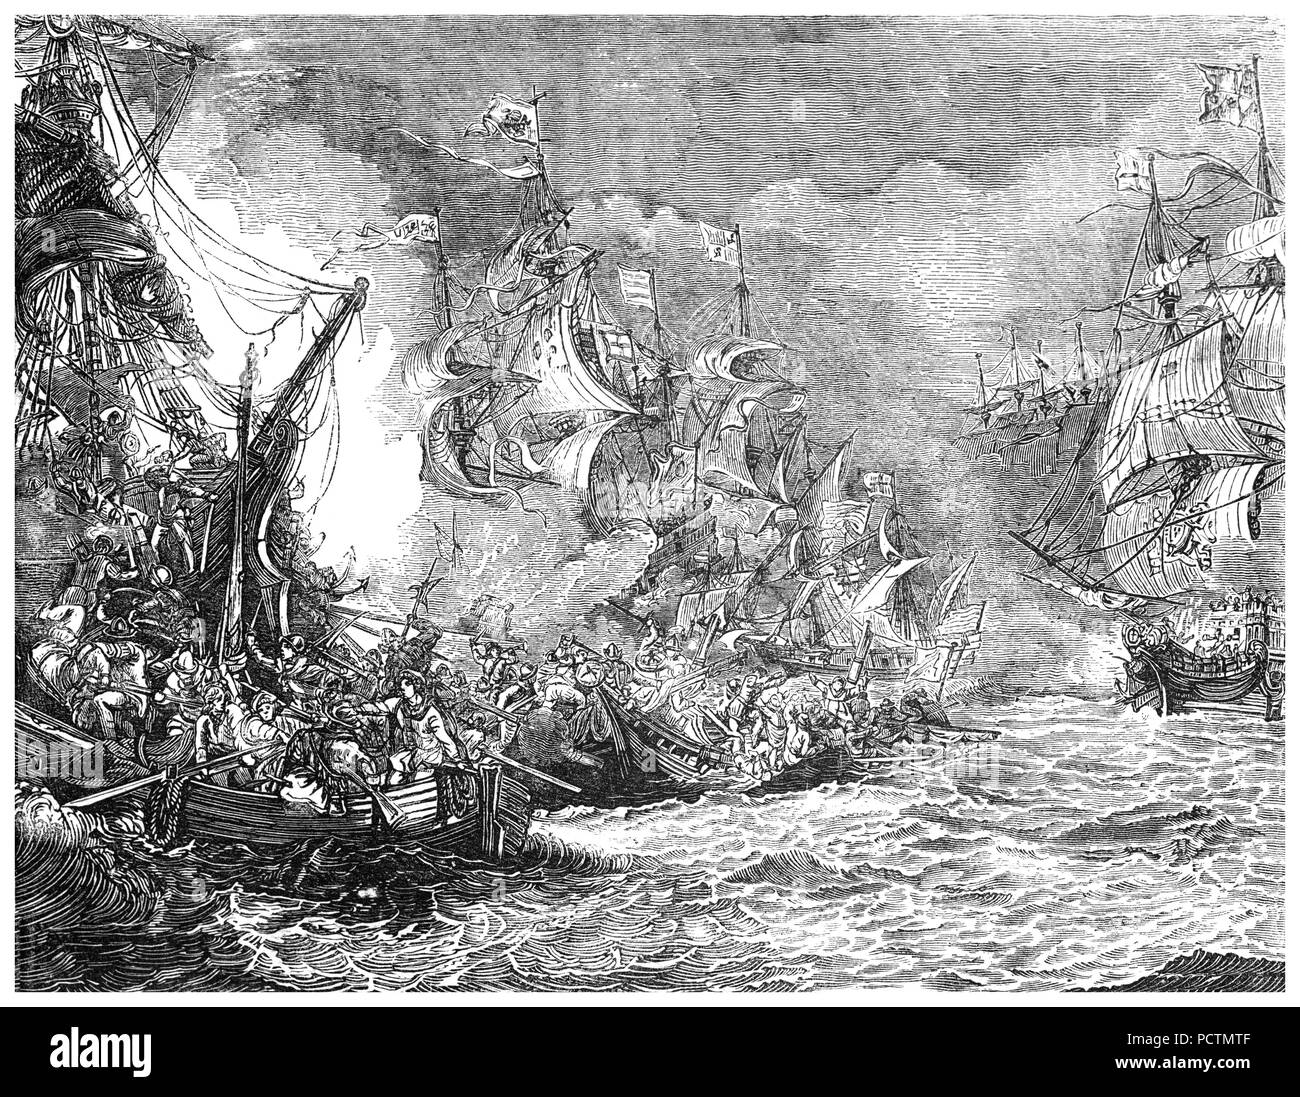 The Spanish Armada under attack from the English fleet during the largest engagement of the undeclared Anglo-Spanish War (1585–1604).  The Spanish fleet of 130 ships sailed f in late May 1588, with the aim of escorting an army from Flanders to invade England and overthrow Queen Elizabeth I and her establishment of Protestantism in England. The Armada anchored off Calais, but was scattered by an English fireship attack. Following  the ensuing Battle of Gravelines the Spanish fleet was forced to return to Spain. Stock Photo